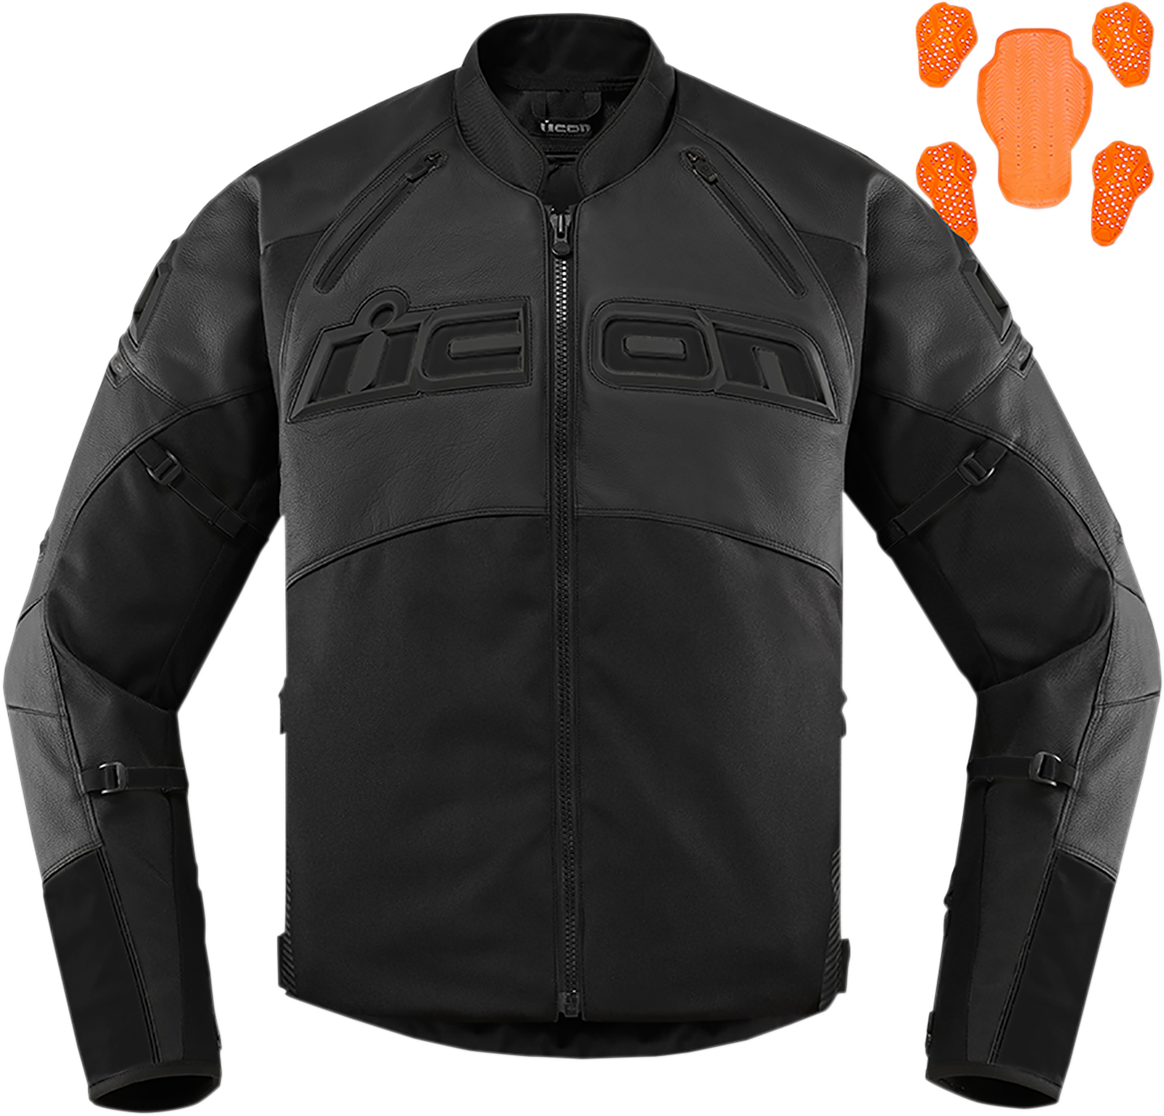 ICON Contra2™ CE Jacket - Stealth - Small 2810-3648